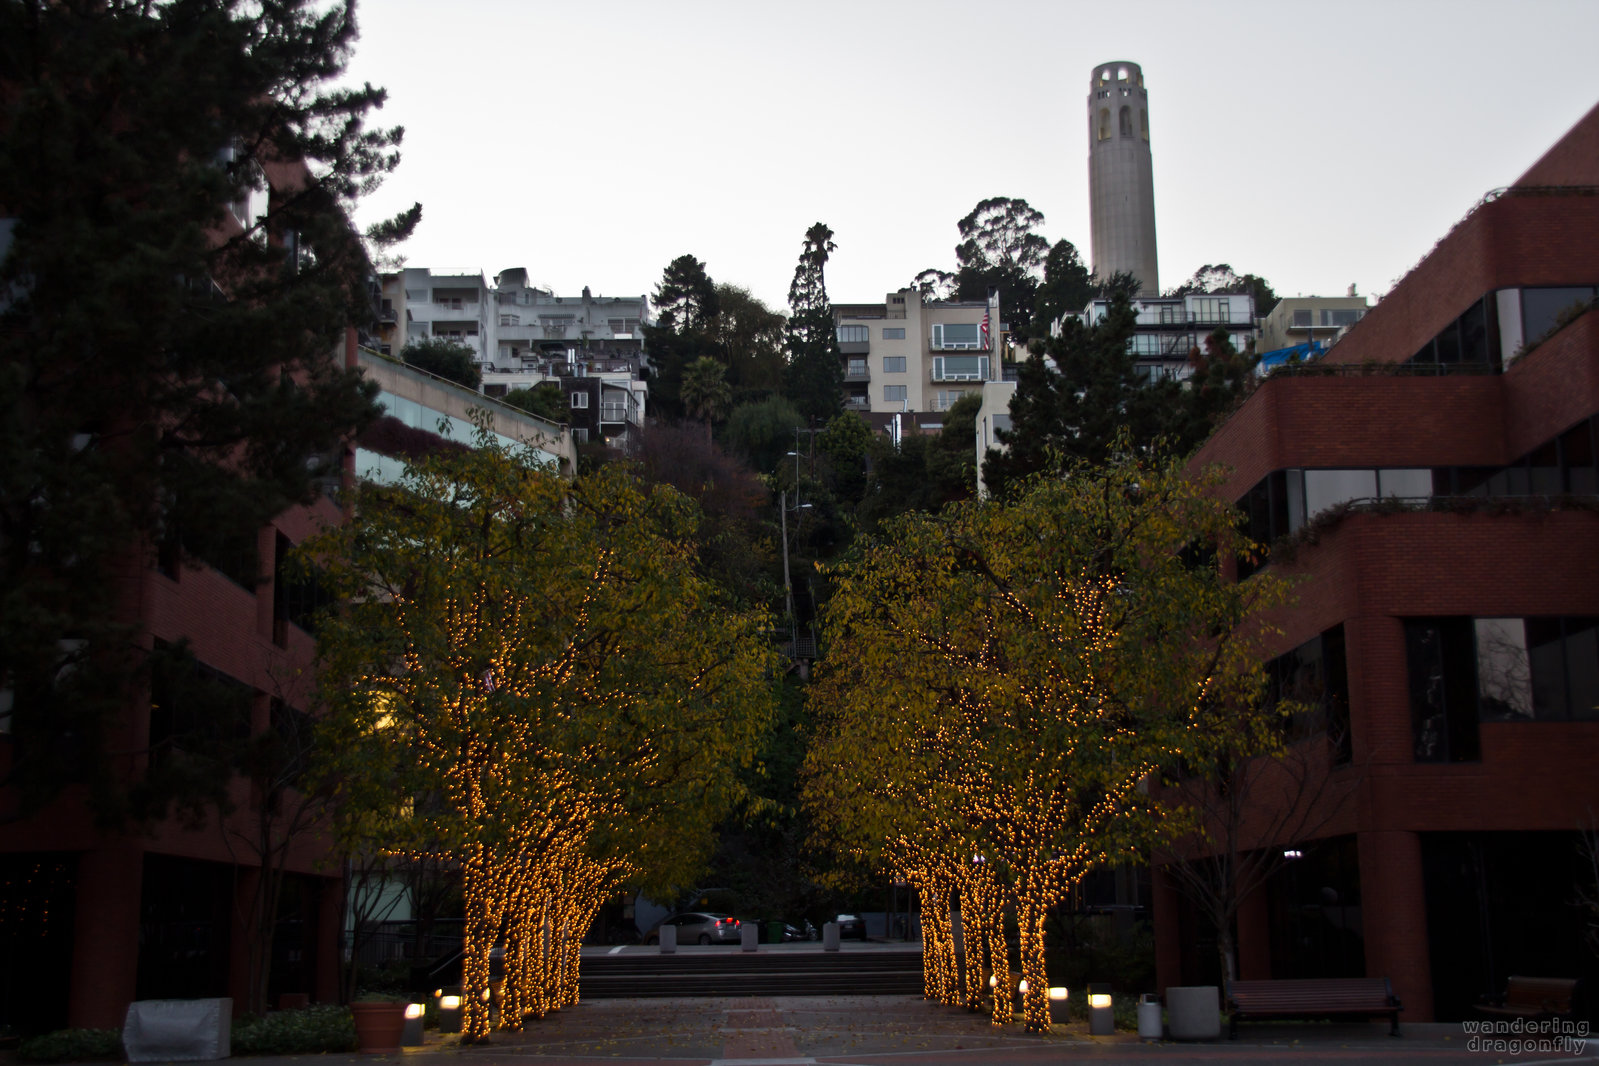 A glimpse at the trees of the Levi's Plaza with the Coit Tower in the background -- building, christmas decoration, tower, tree